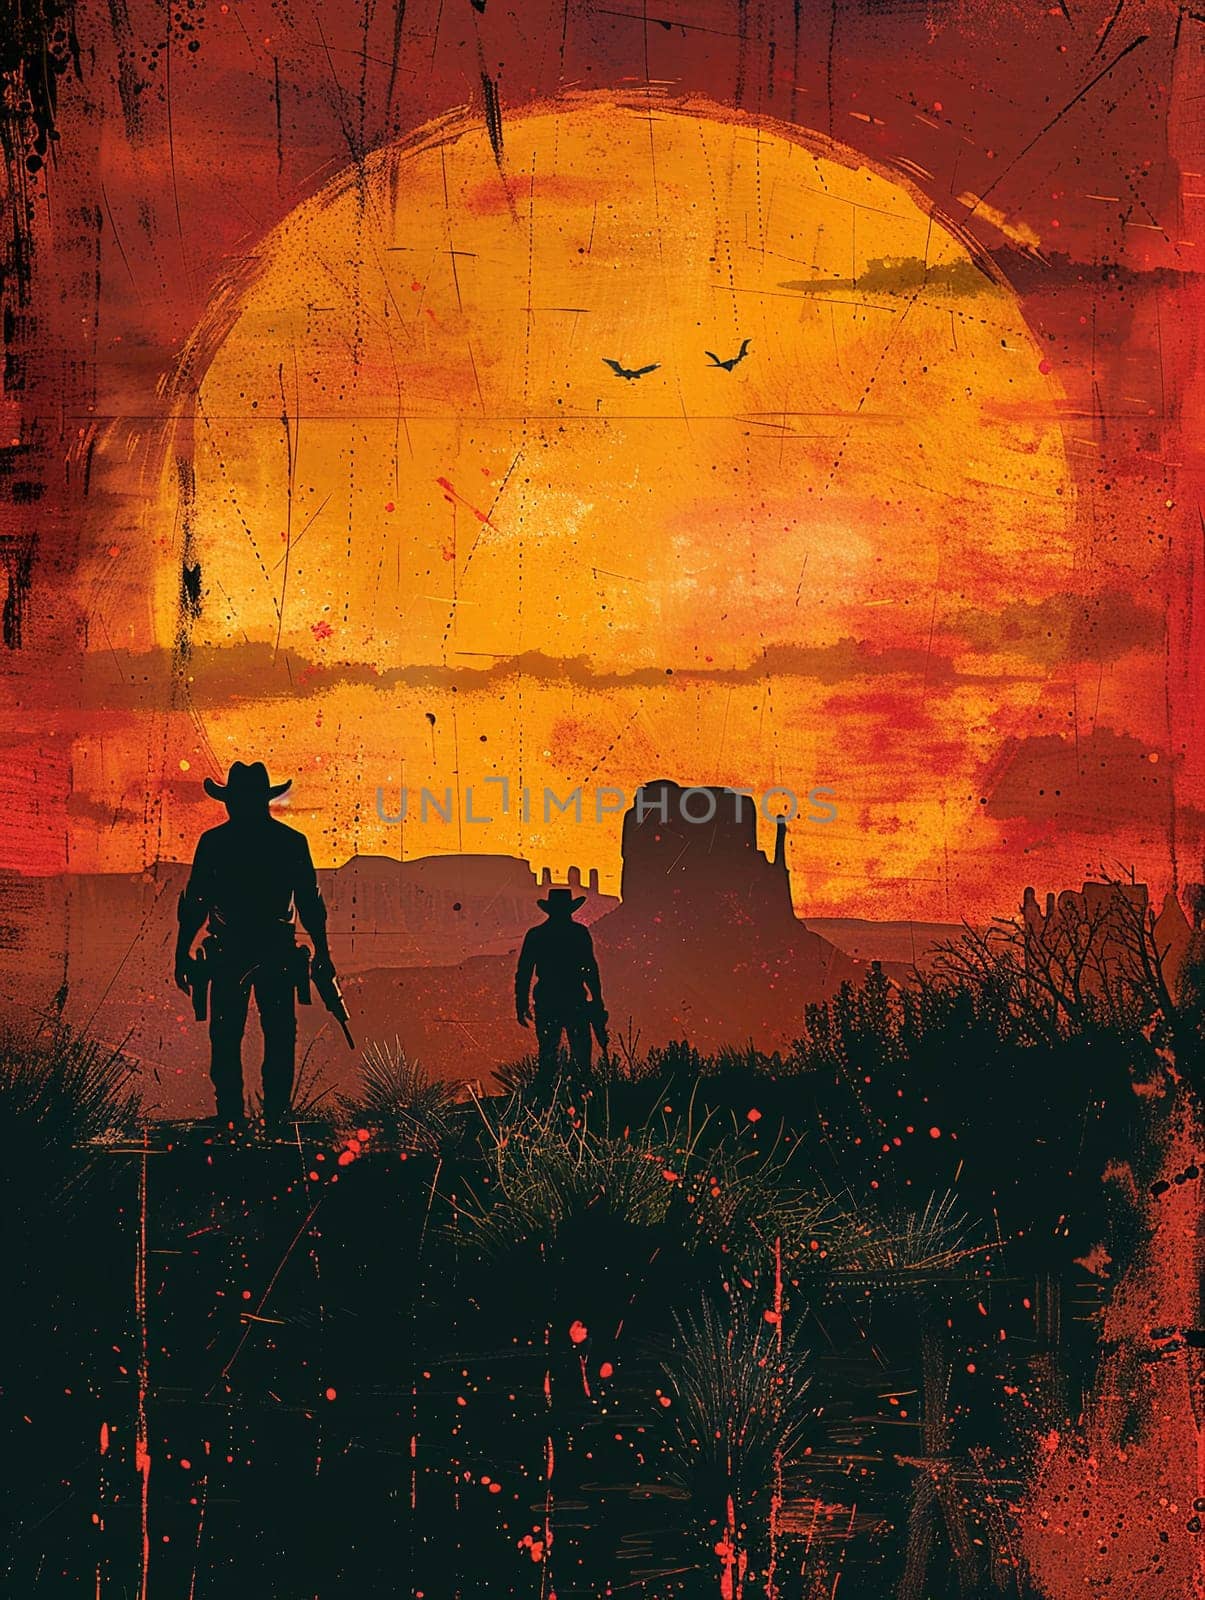 Wild west showdown, illustrated with a gritty comic book style and a dusty, sunset palette.